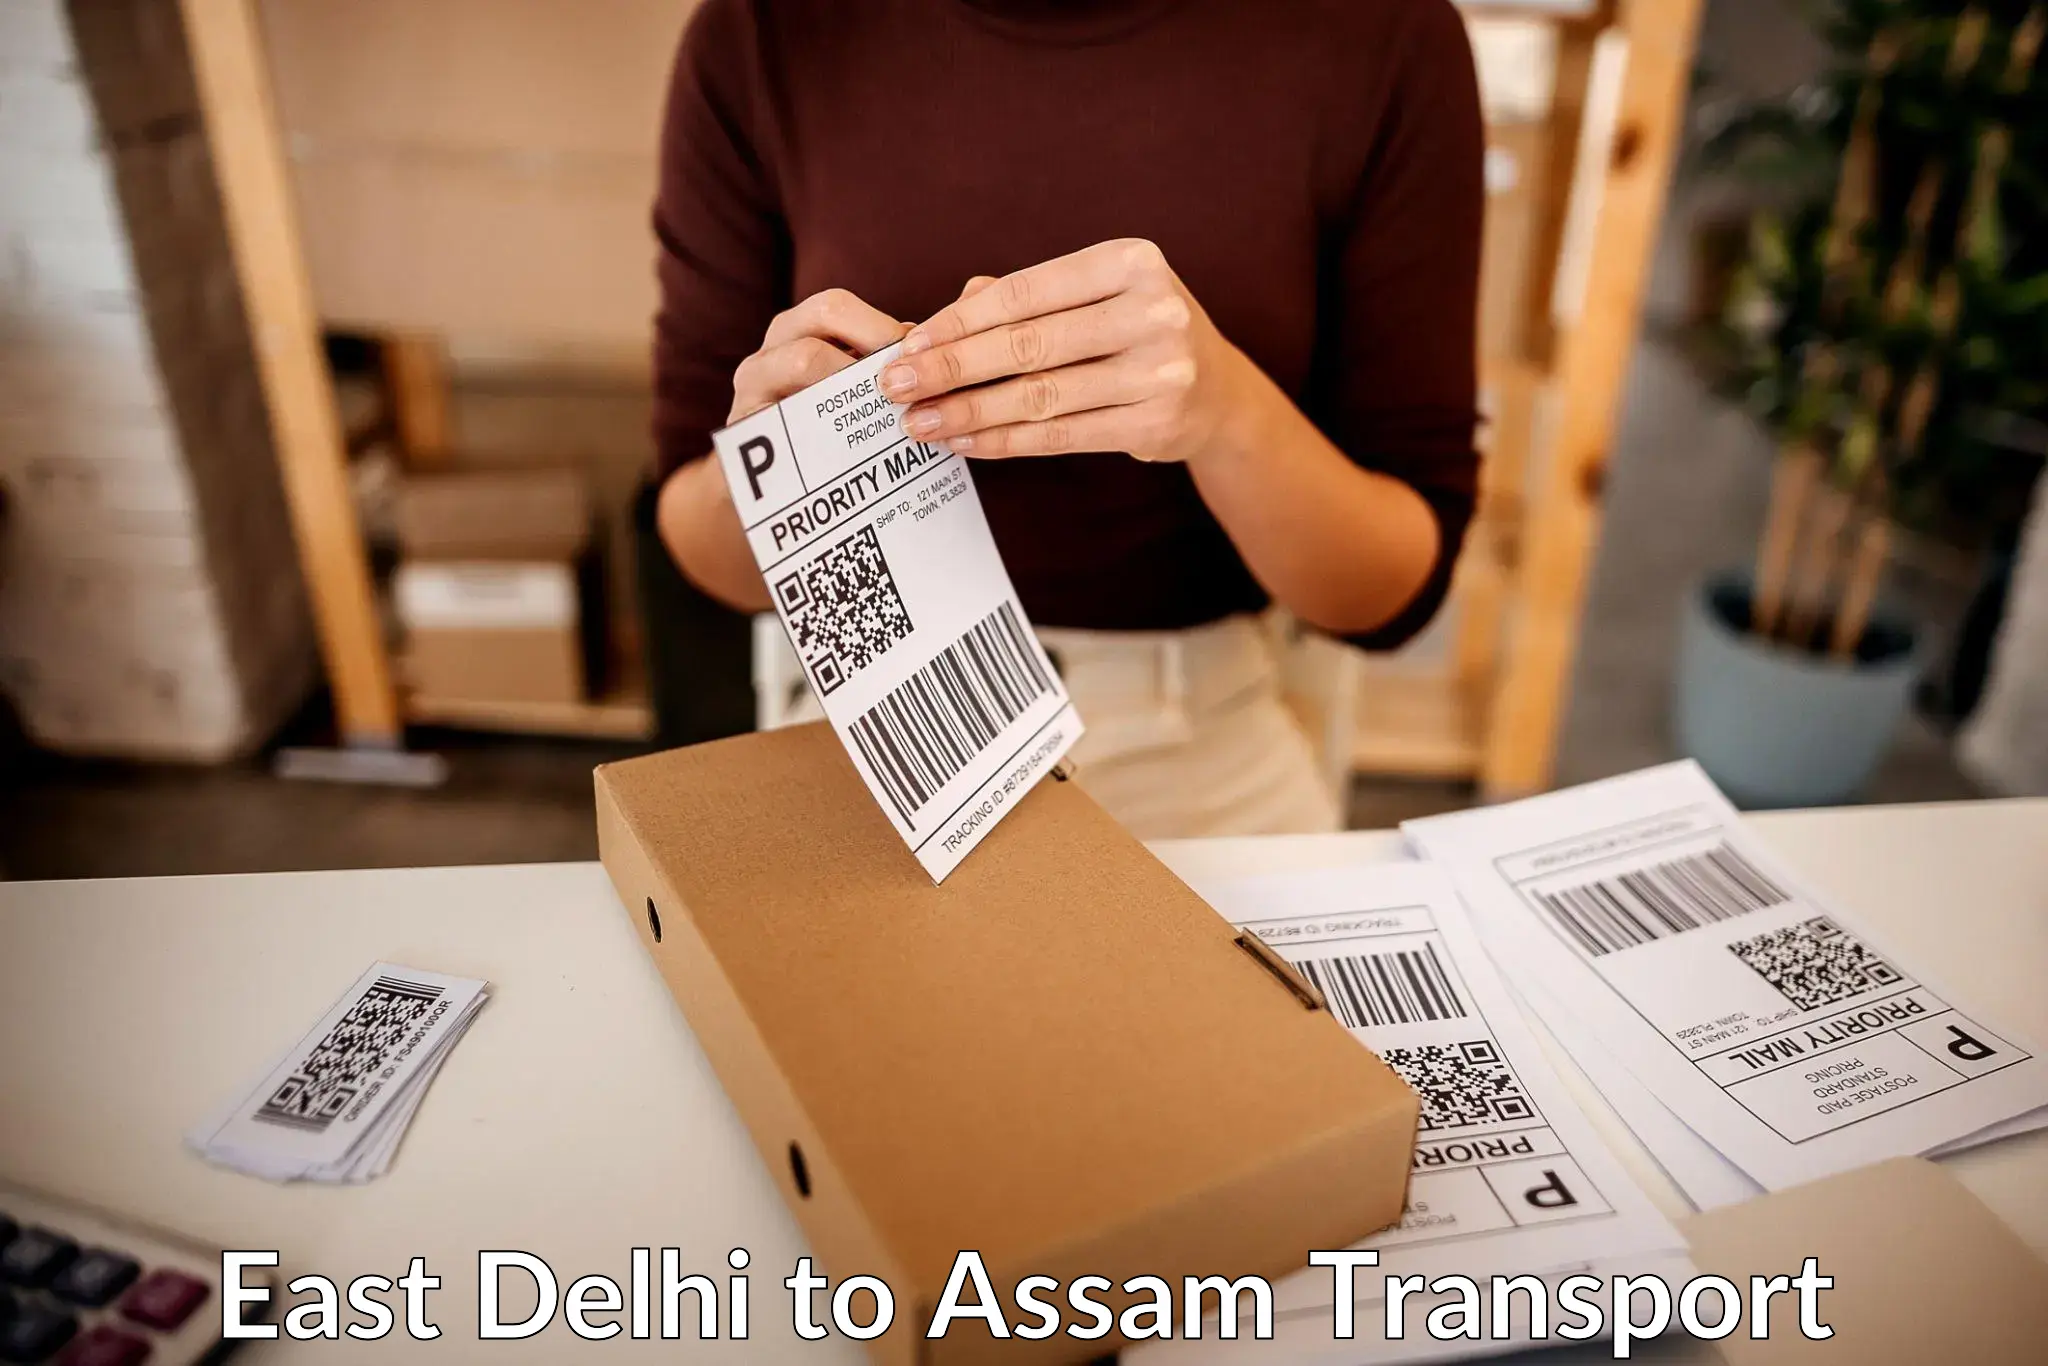 Container transport service East Delhi to Assam